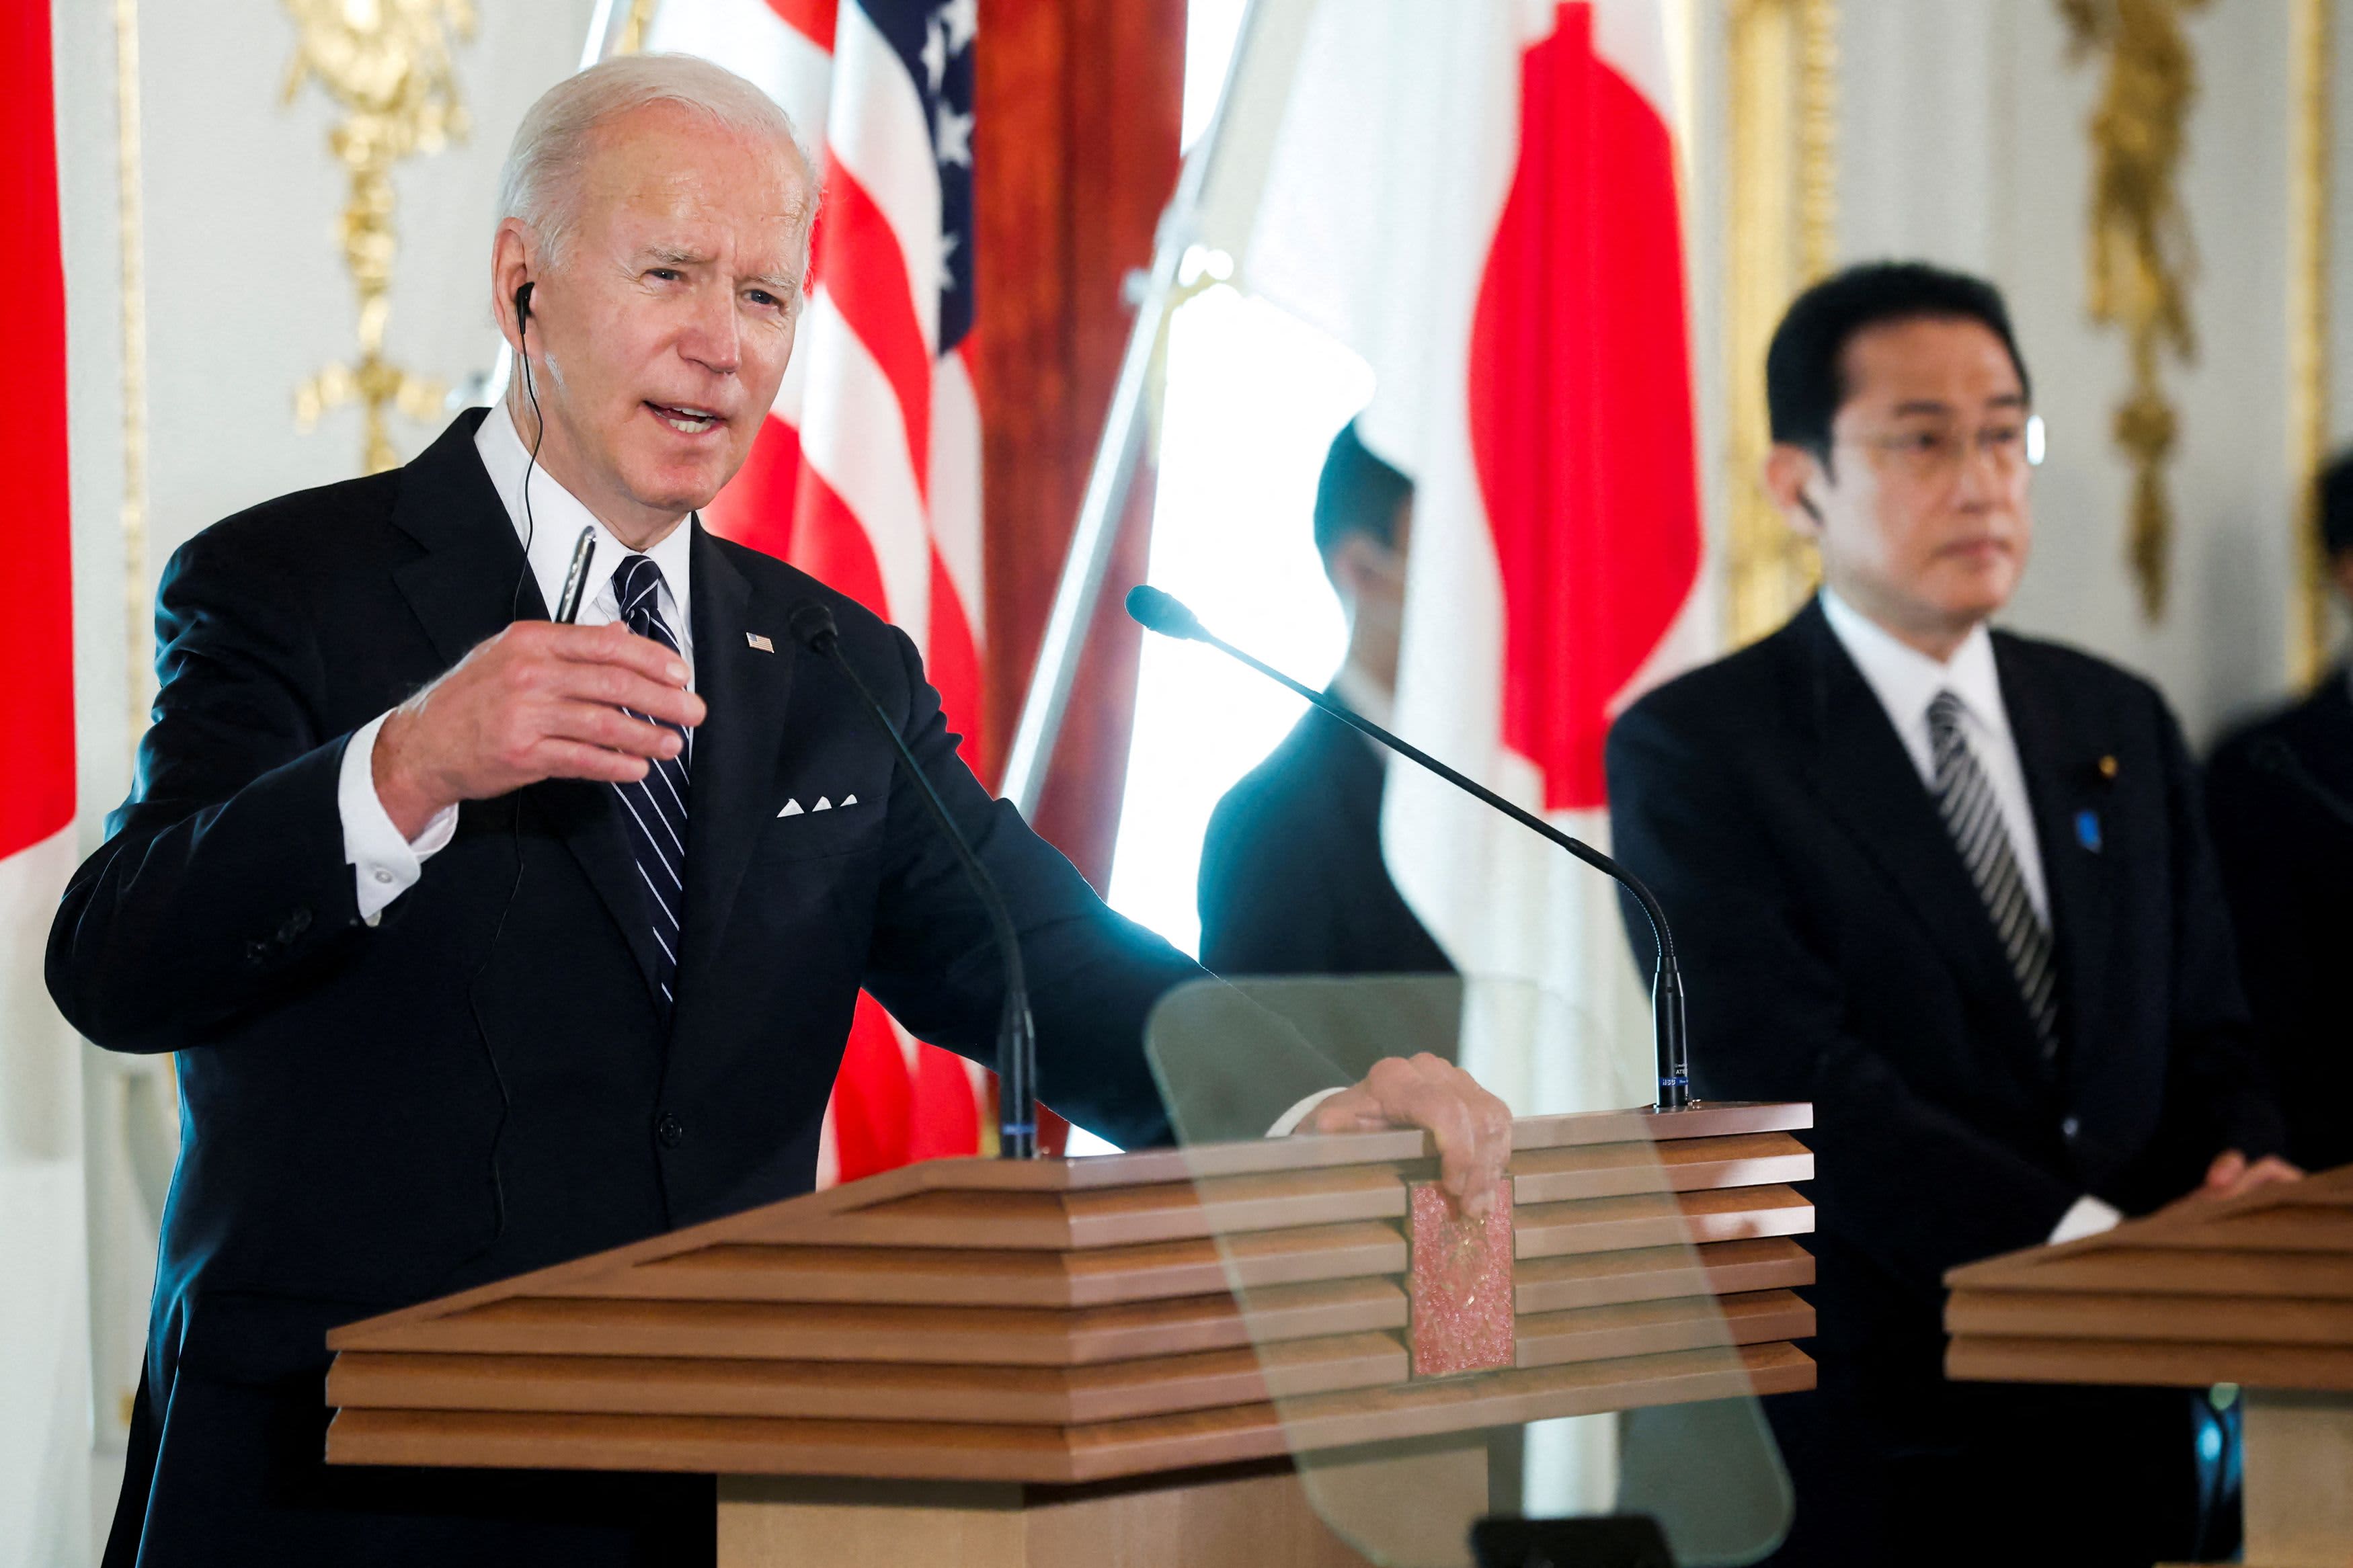 Biden says his Taiwan comments don't reflect a change in U.S. policy